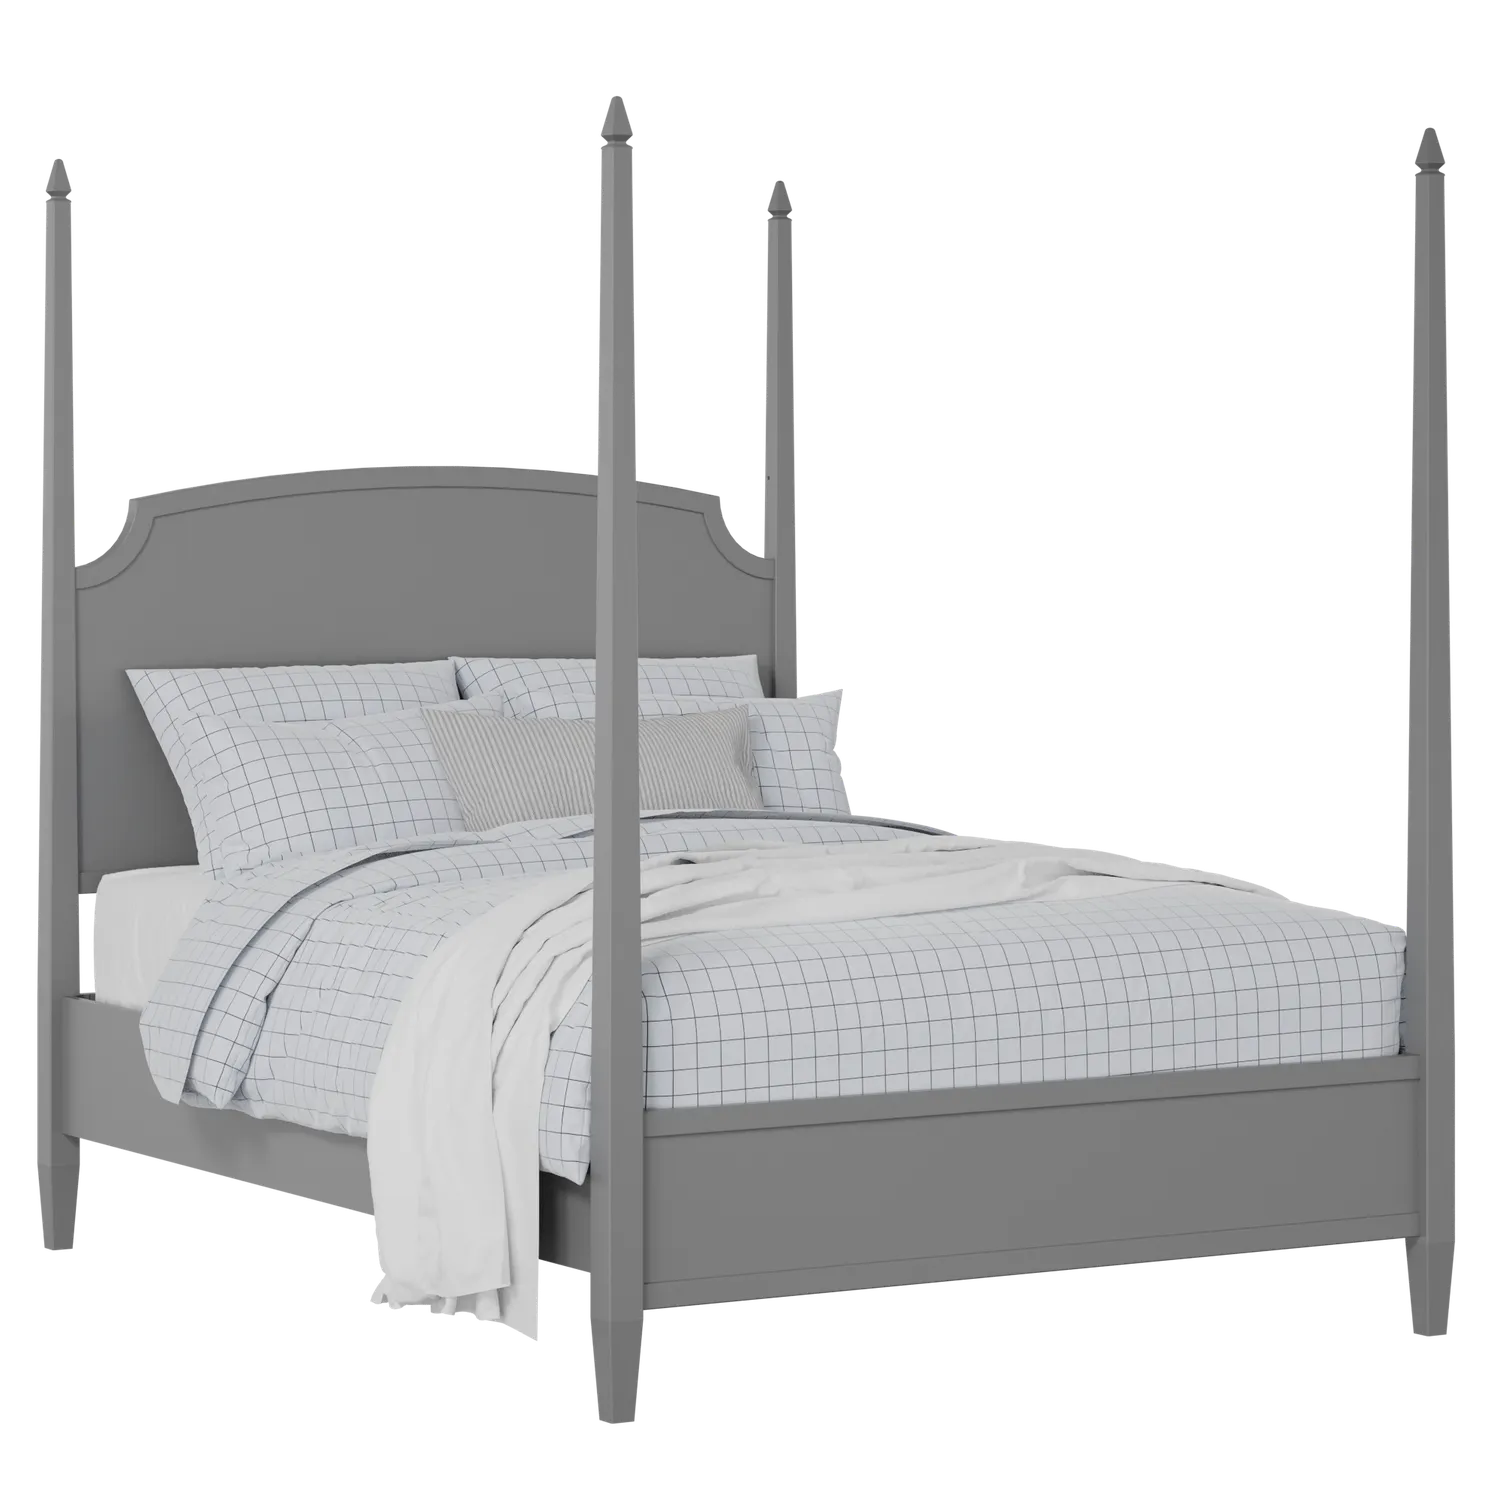 Austin Slim painted wood bed in grey with Juno mattress